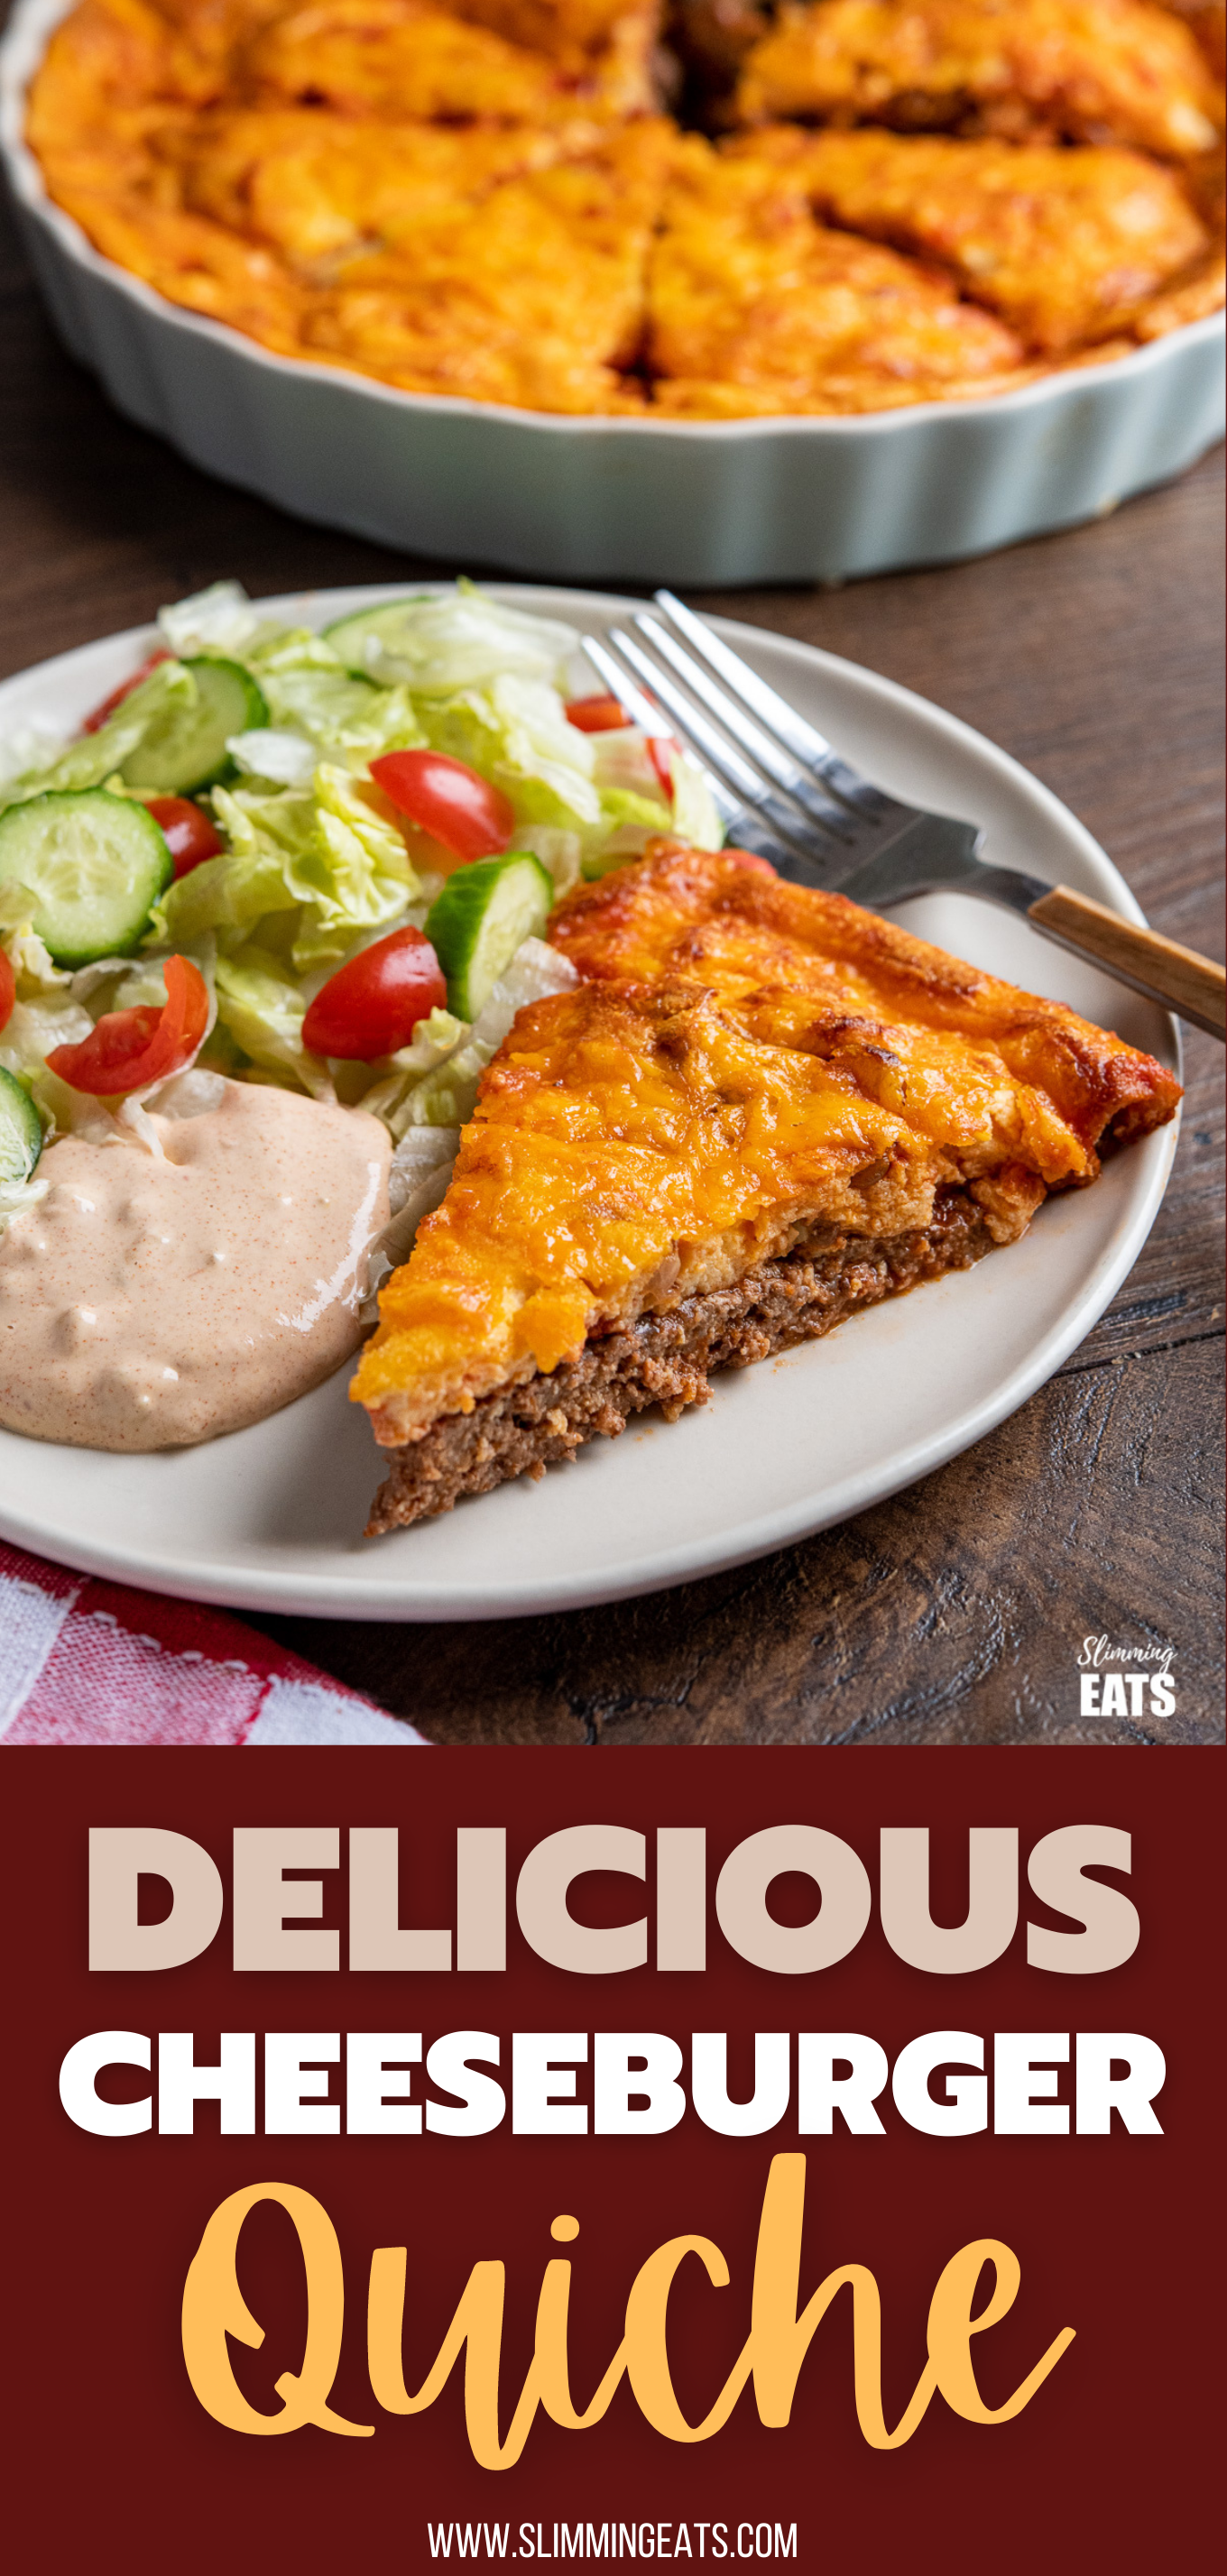 slice of cheeseburger quiche on a plate with burger sauce and salad